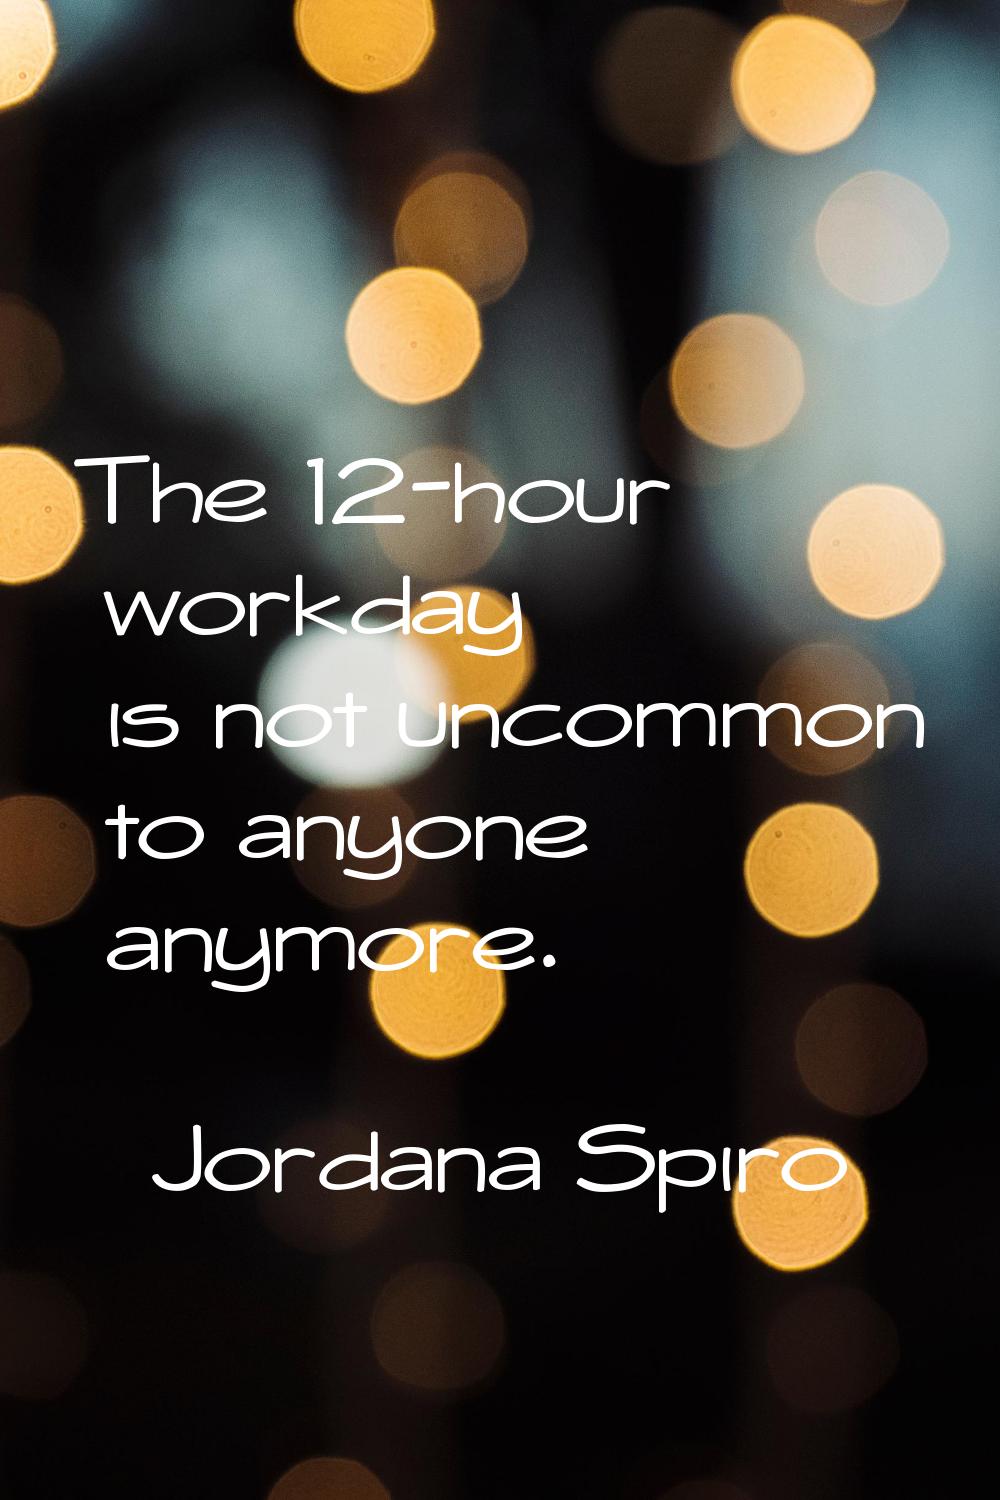 The 12-hour workday is not uncommon to anyone anymore.